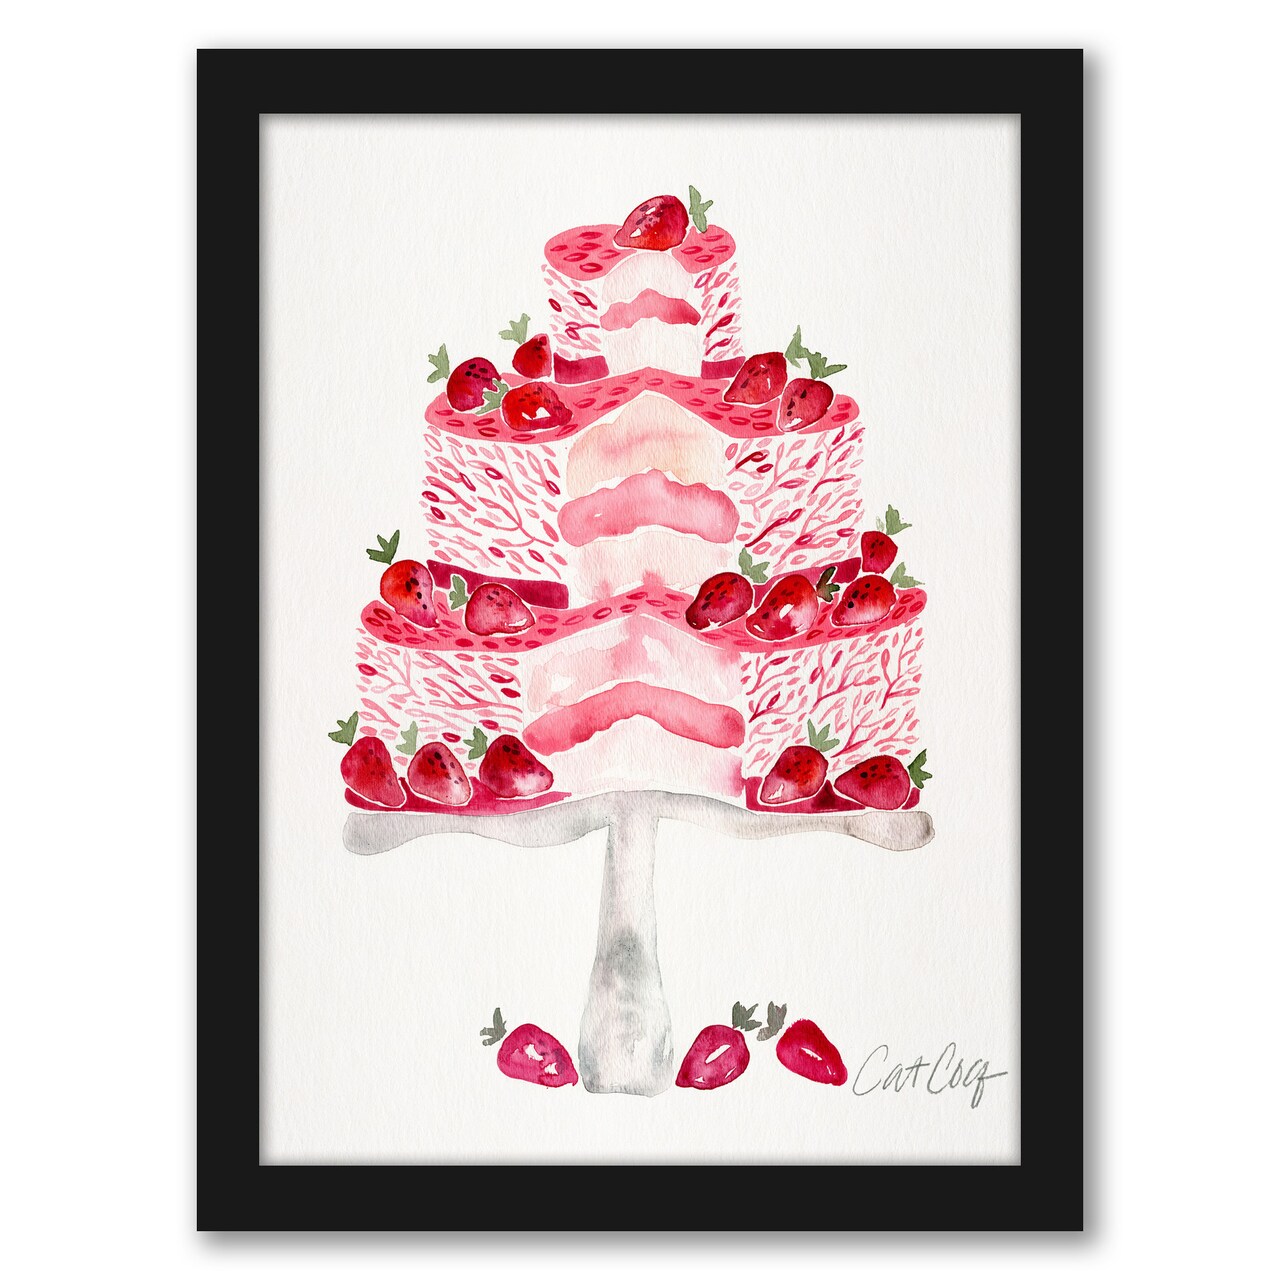 Strawberry Short Cake by Cat Coquillette Frame  - Americanflat